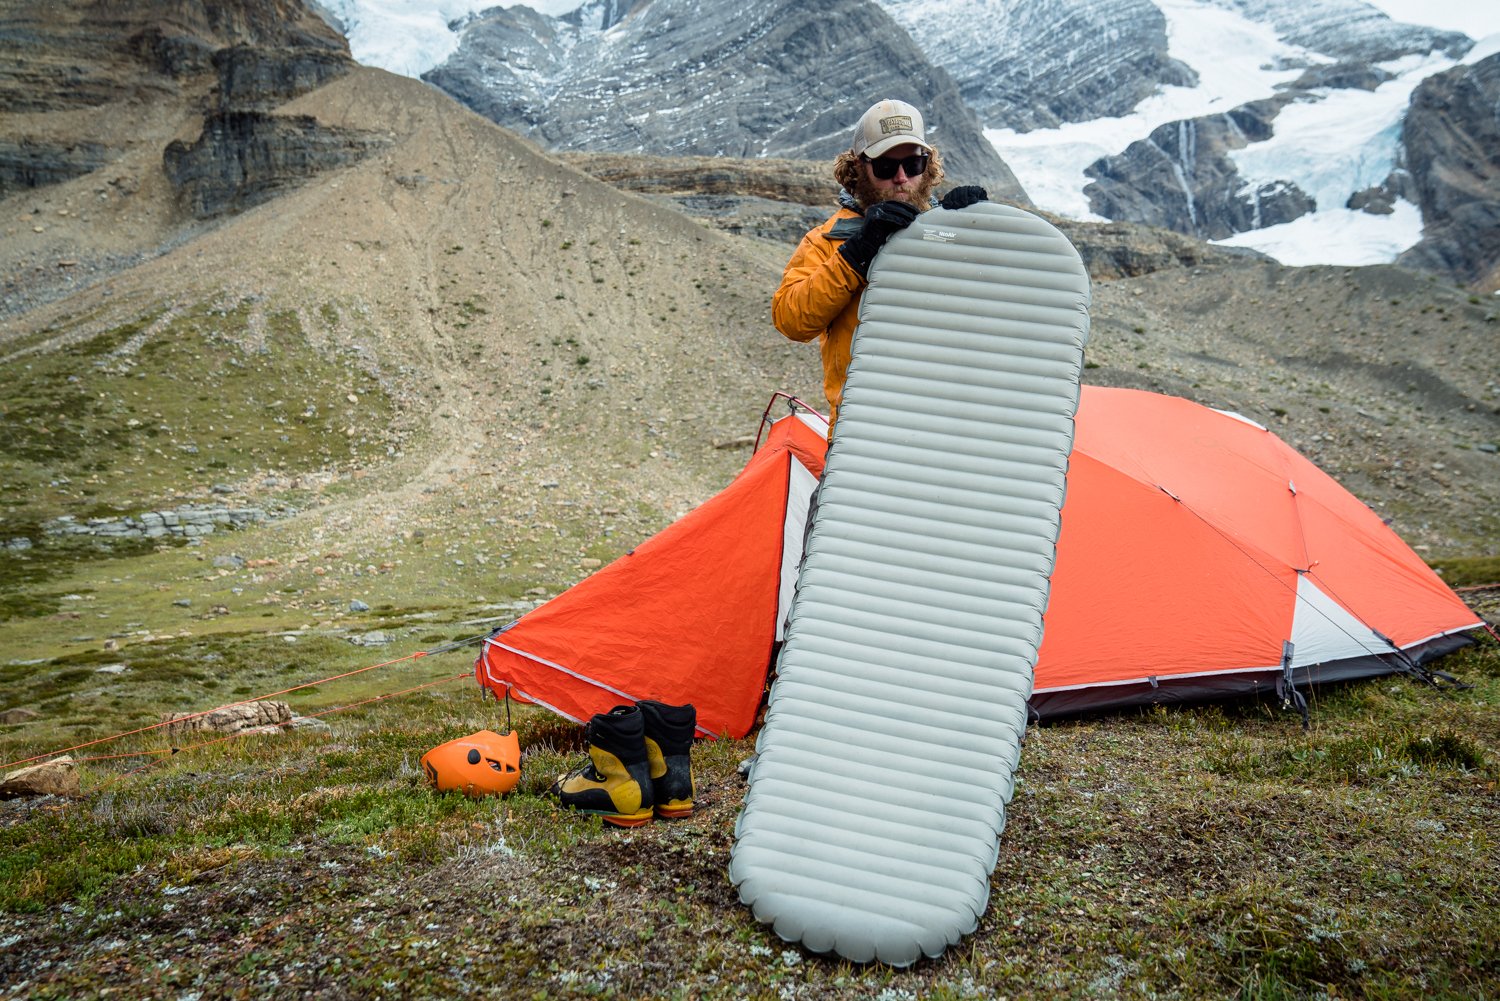 Climbers set up camp on Mount Robson